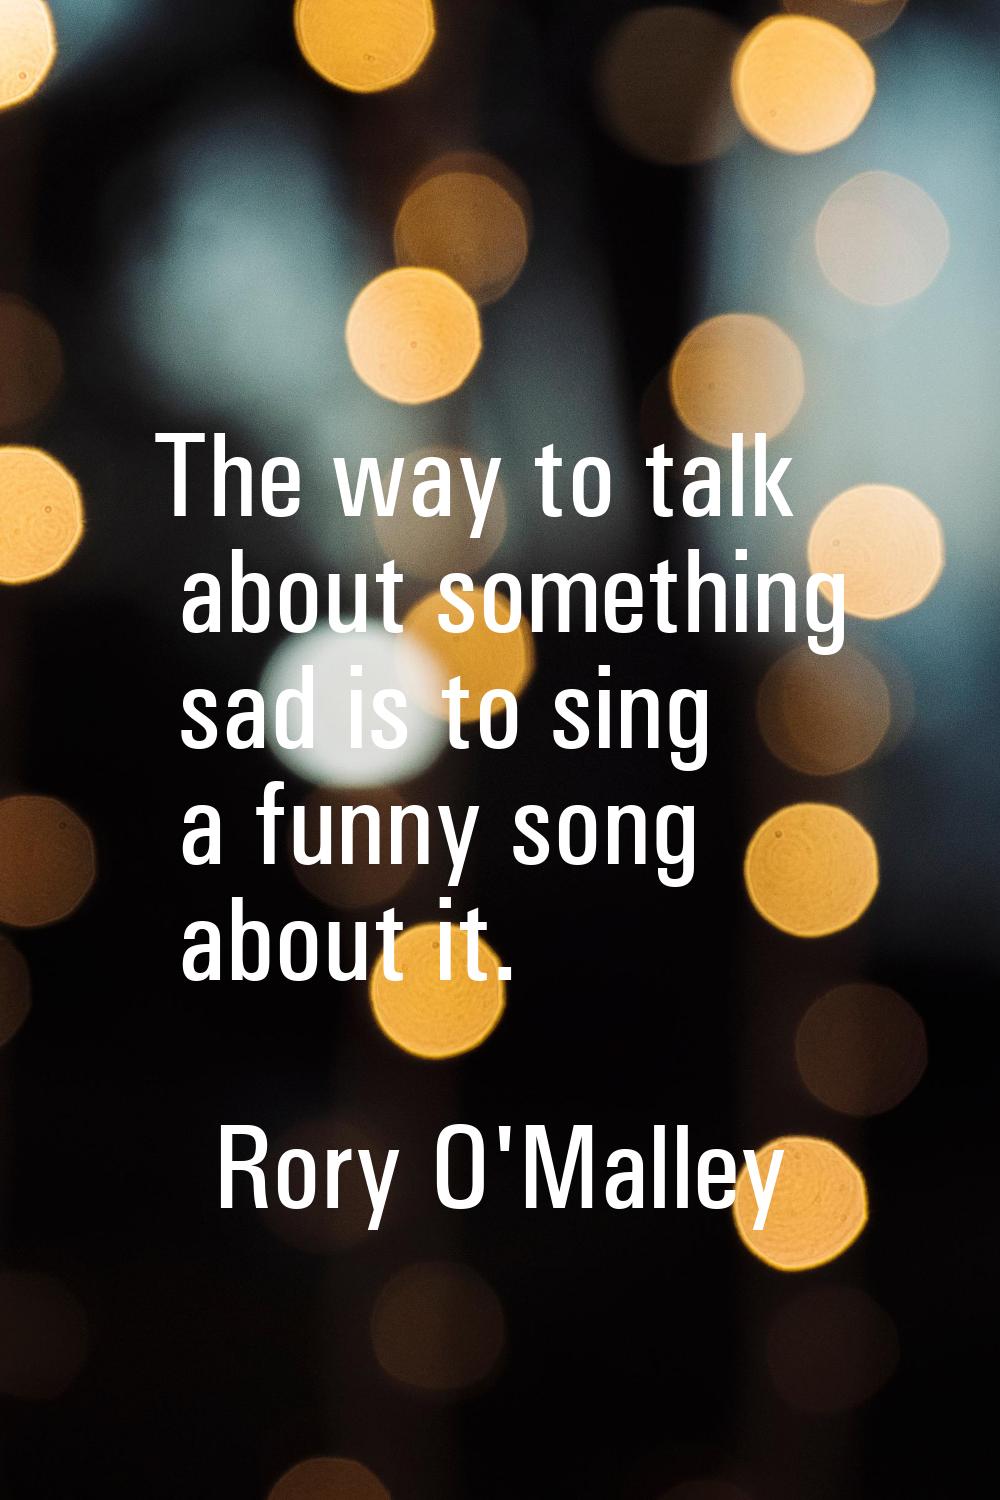 The way to talk about something sad is to sing a funny song about it.